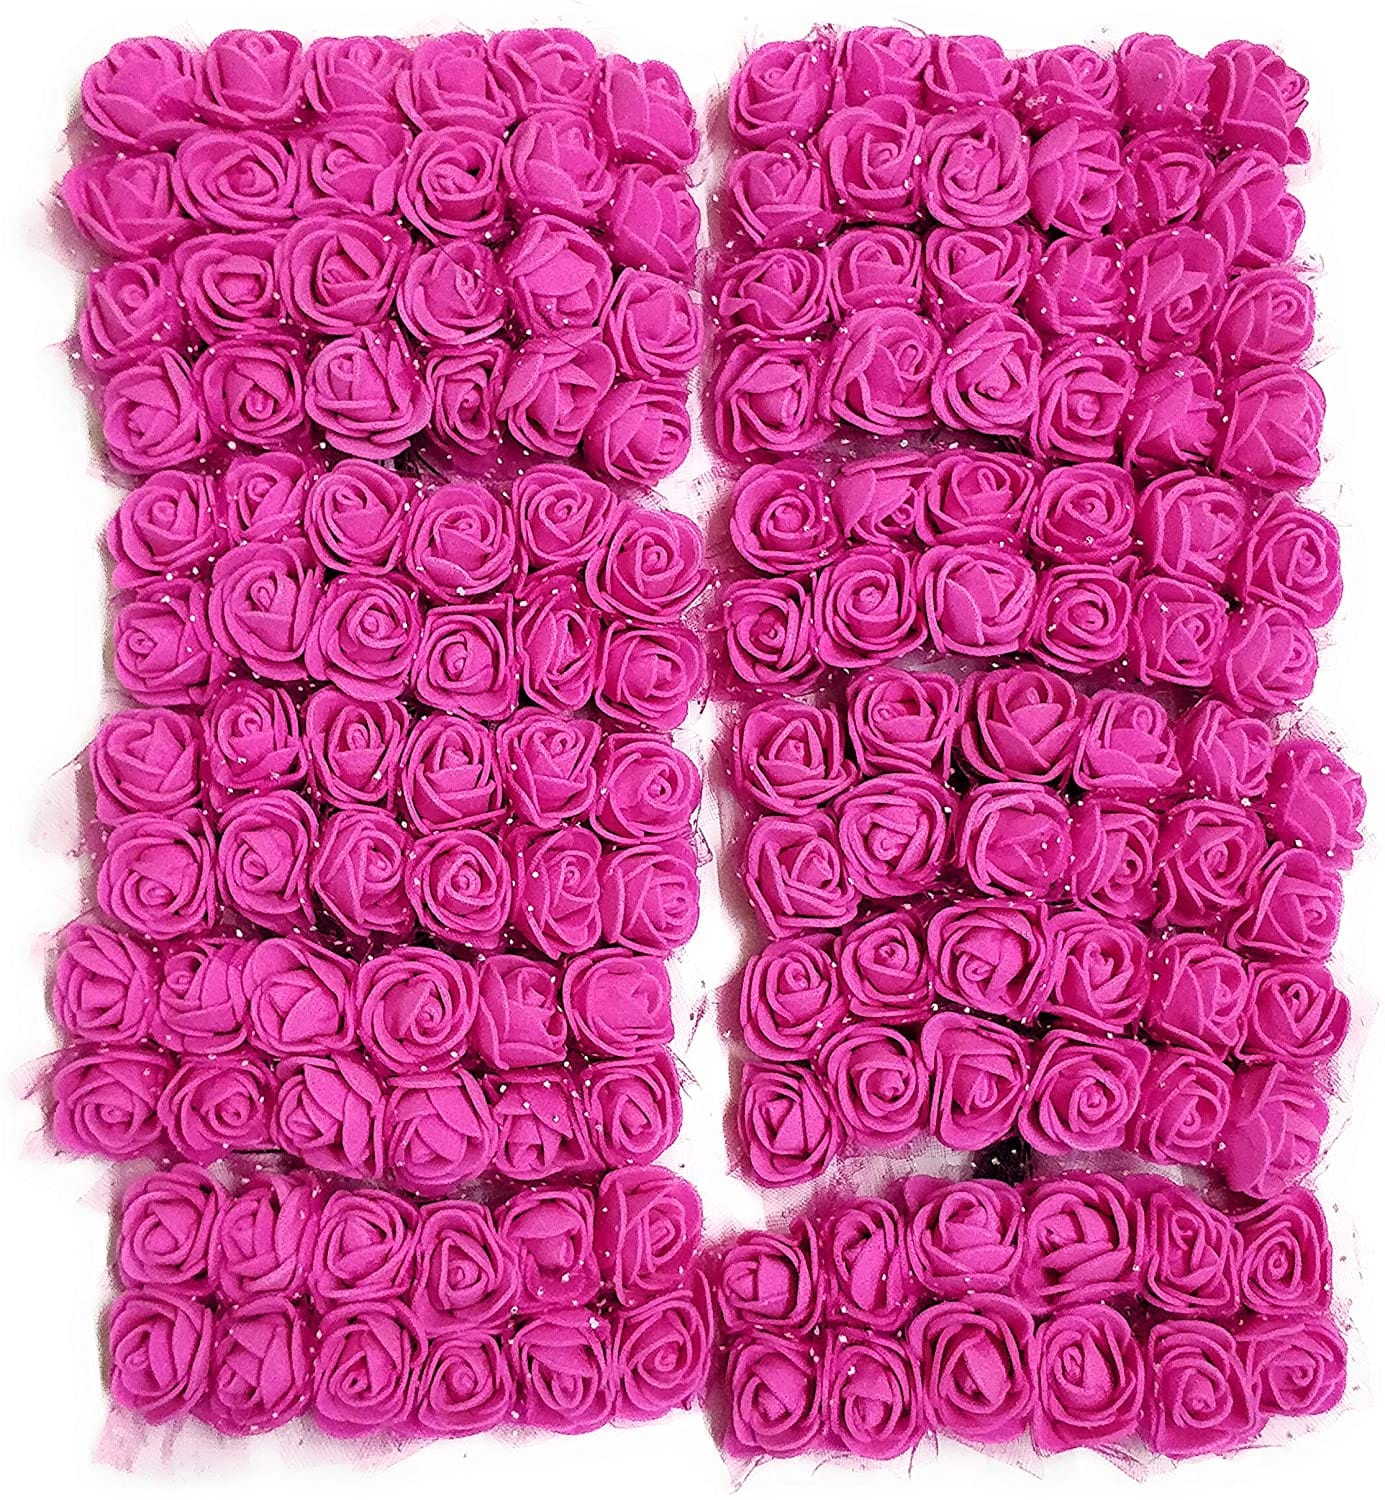 Lamansh Raw materials for Flower jewellery Pink / 1 Packet ( 144 Flowers ) Pink foam Flowers Pack of (144) Artificial foam Flowers / Raw materials for Flower jewellery & other products / Pack of 144 flowers